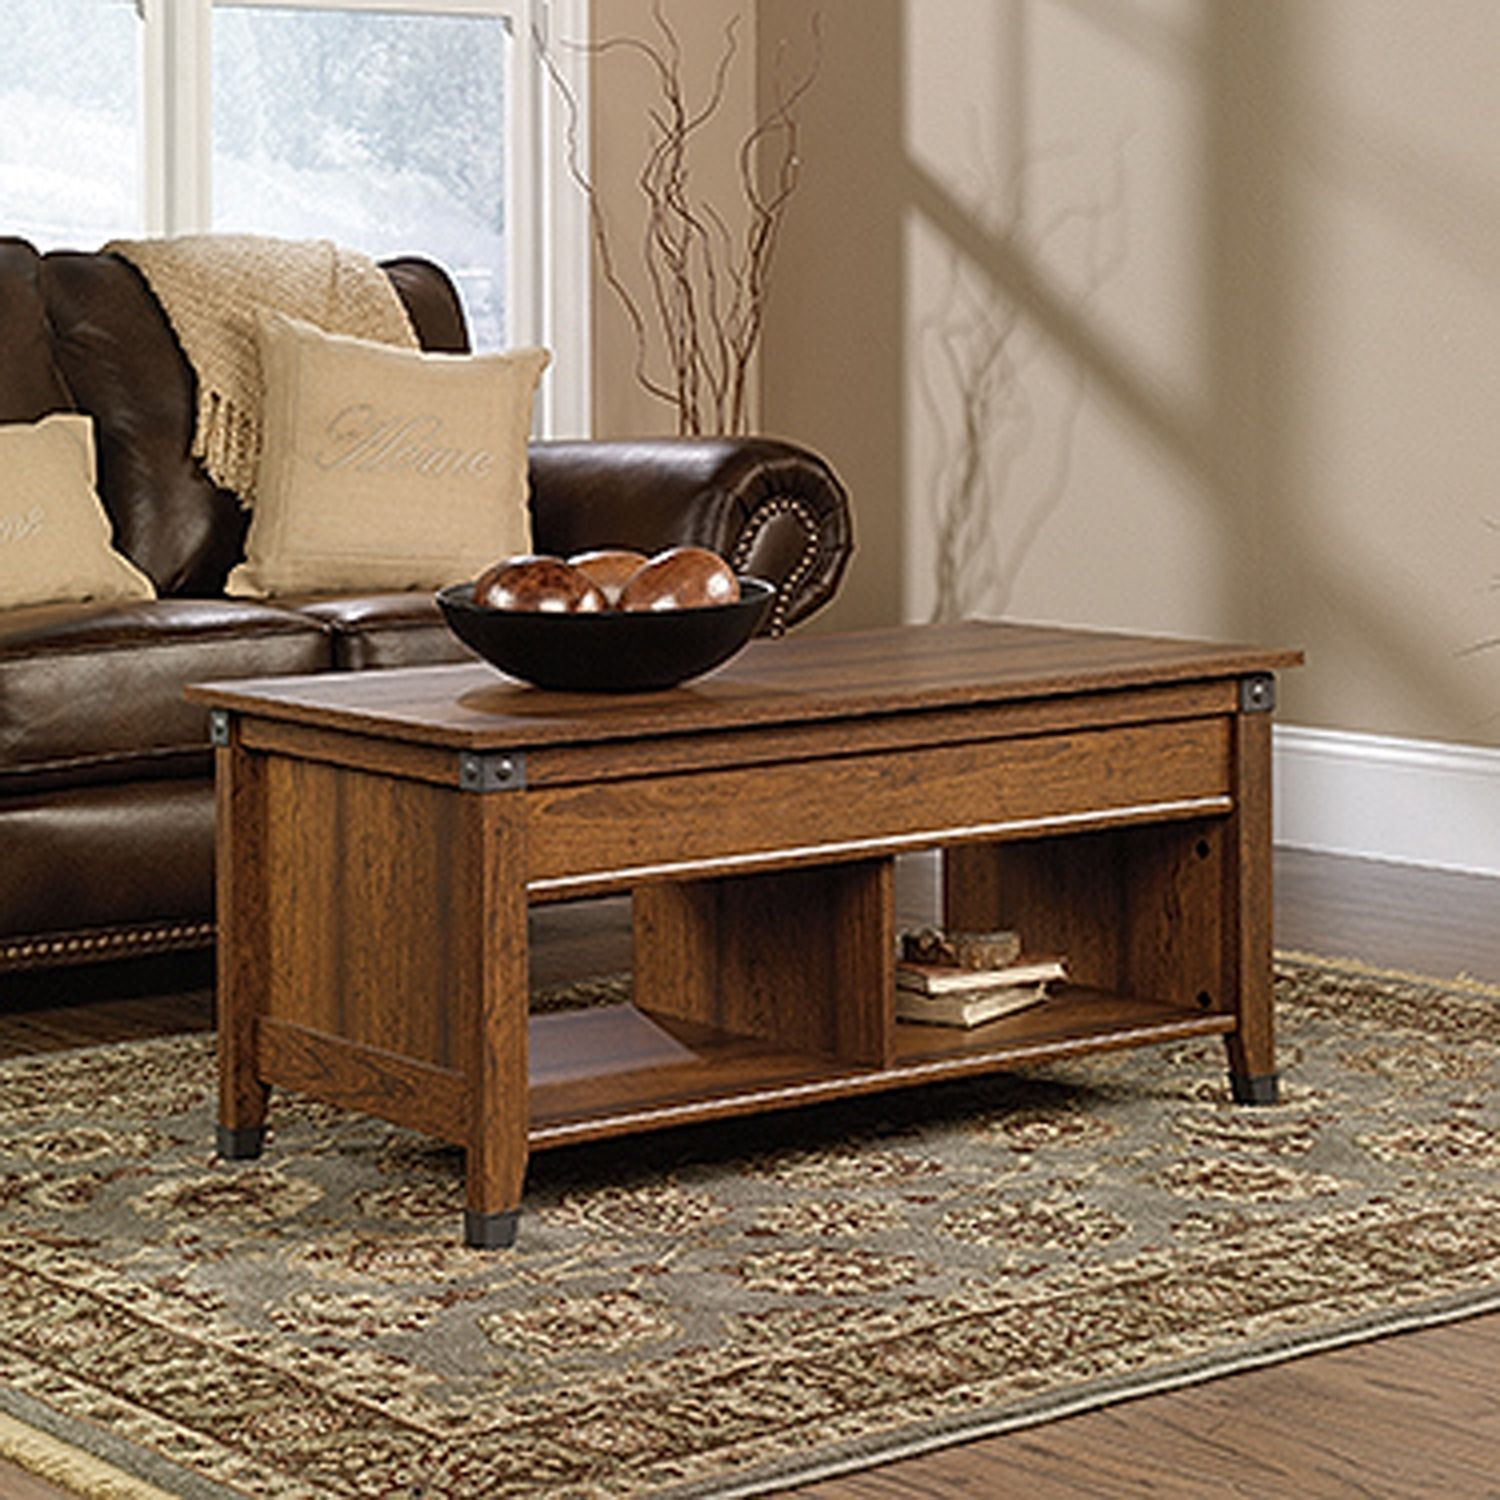 Carson Forge Lift Top Coffee Table Washington Cher 414444 Sauder pertaining to measurements 1500 X 1500